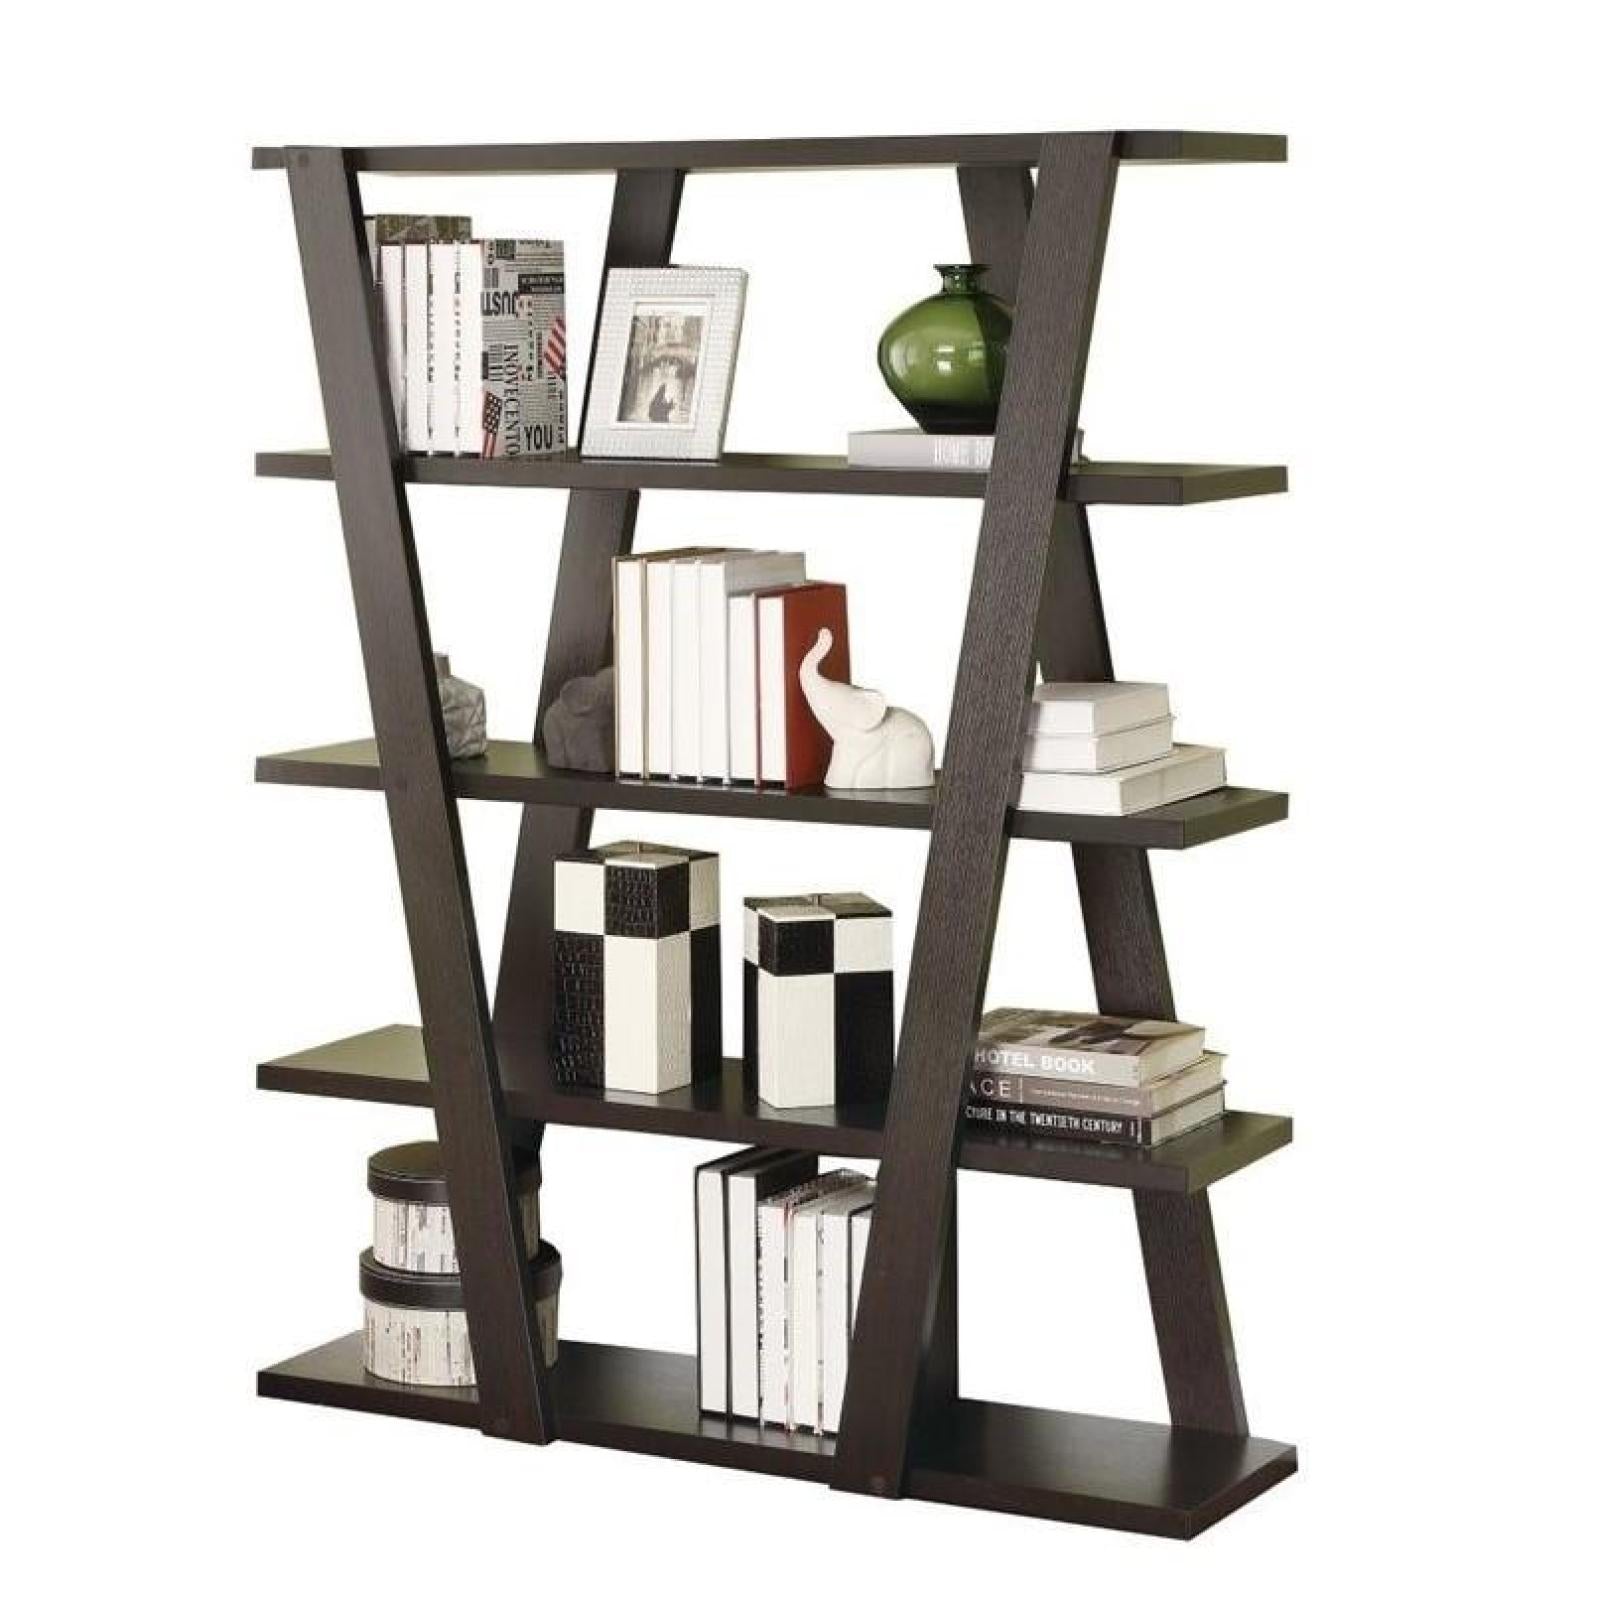 Modern Bookshelf With Inverted Supports Open Shelves Adams